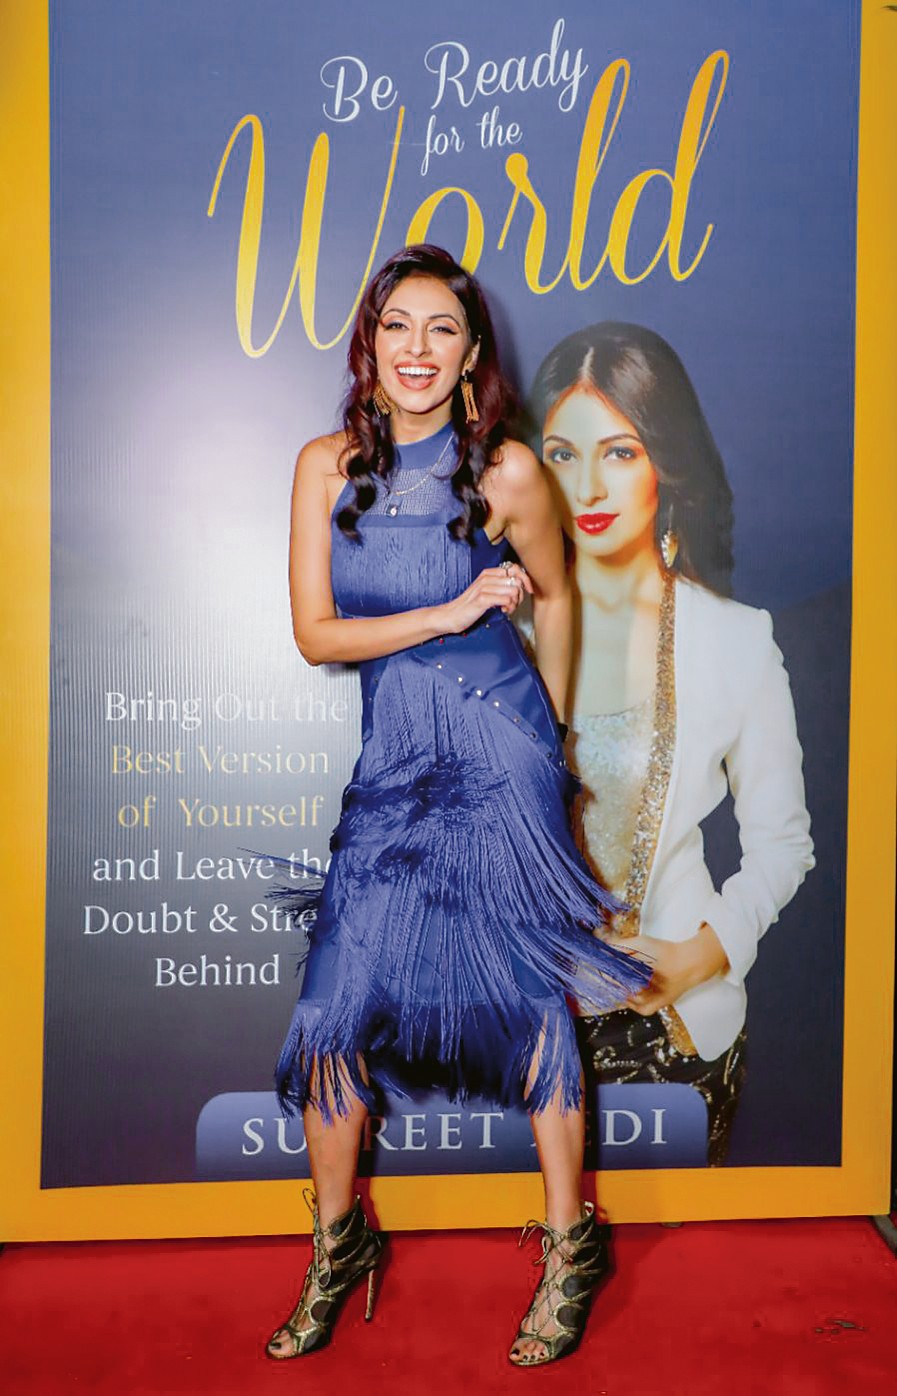 Actress, anchor and pageant mentor Supreet Bedi comes out with her book, titled Be Ready For The World